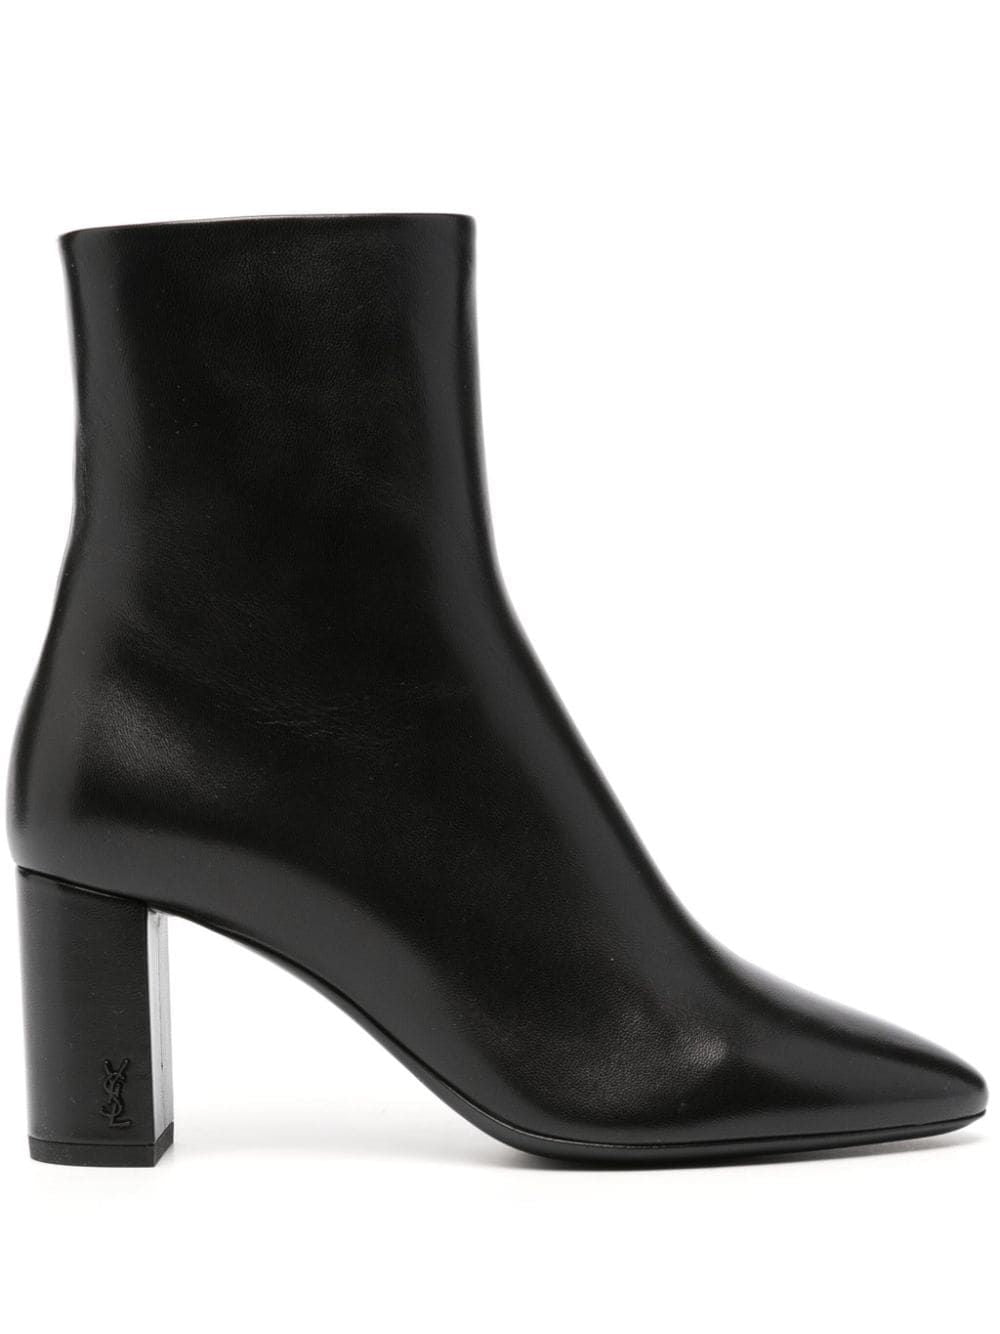 Stylish Black Leather Women's Ankle Boots - FW24 Collection